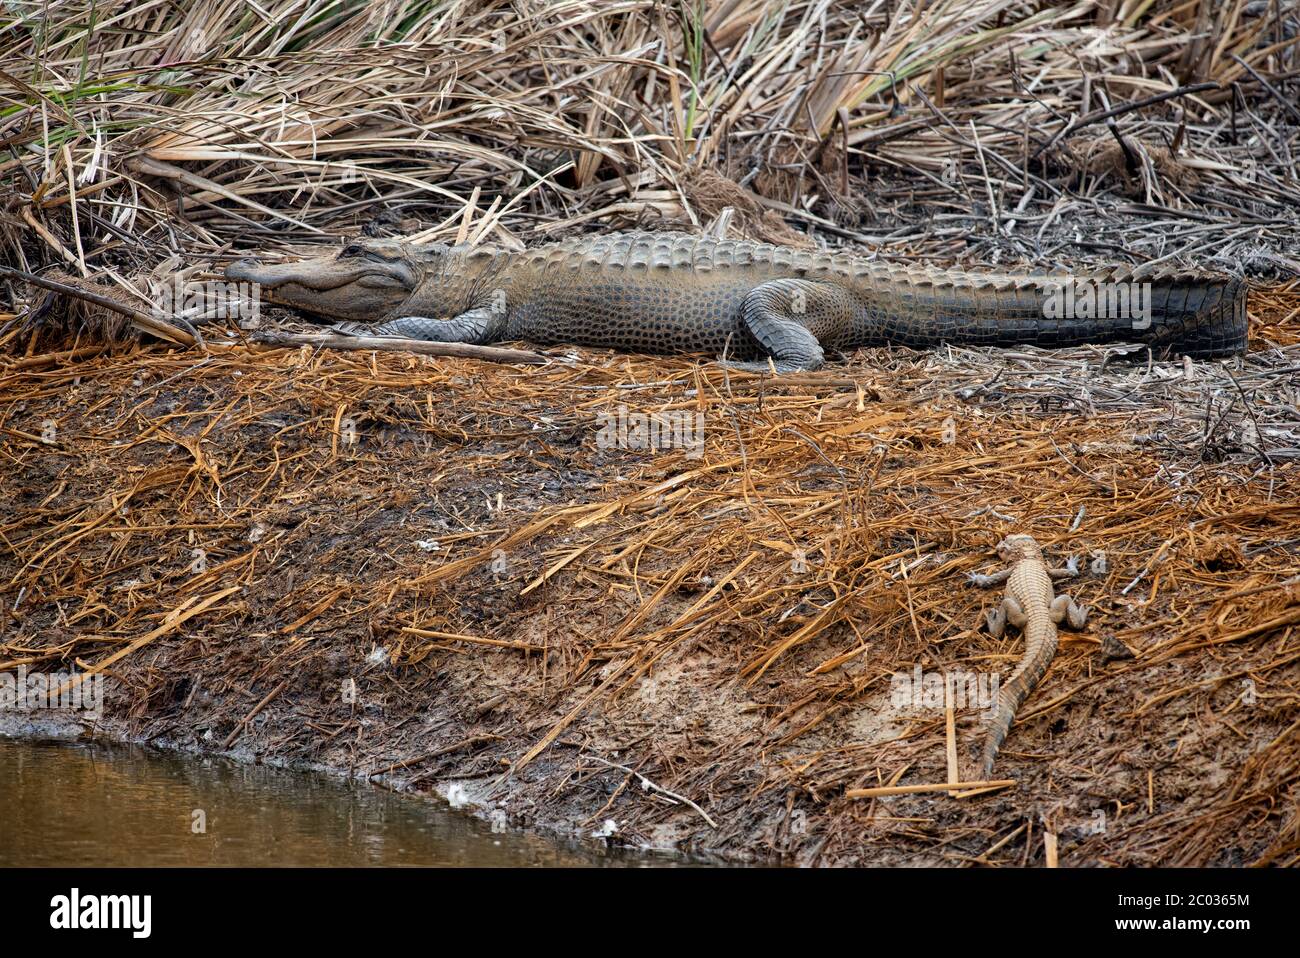 Large Adult Alligator basking on the river bank in Northern Florida warming up from brumation as winter turns into spring with small gator by its side Stock Photo